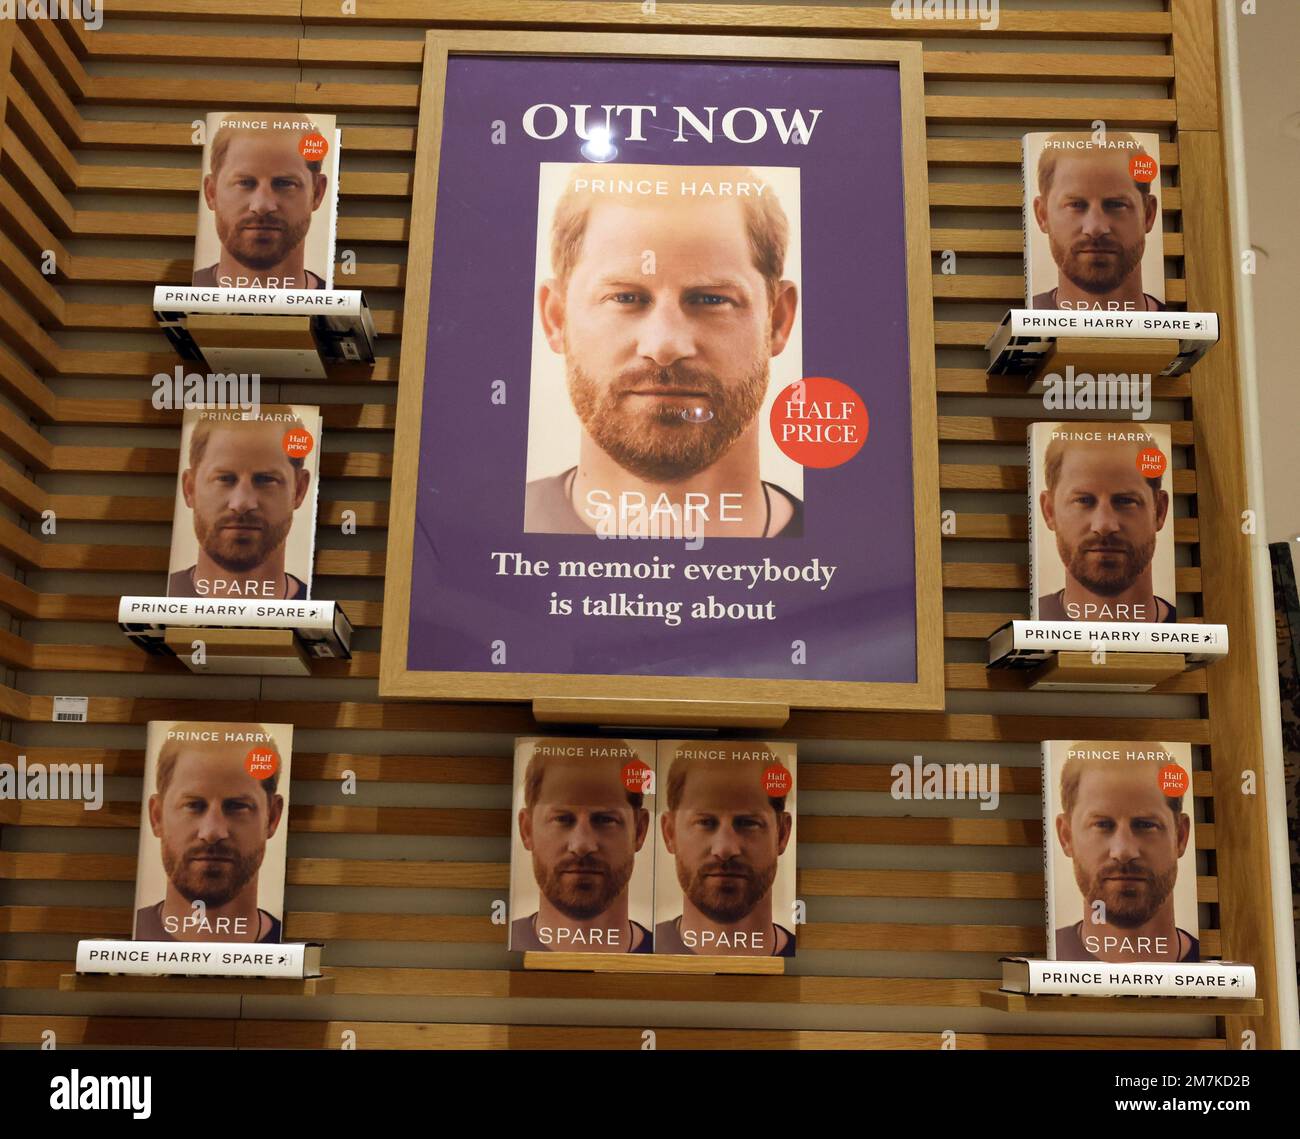 London, UK. 10th Jan, 2023. Copies of the new book by His Royal Highness Prince Harry, The Duke of Sussex titled 'Spare' are displayed at the United Kingdom's largest bookshop Waterstones, Piccadilly in London, on Tuesday, January 10, 2023. Prince Harry's memoir 'Spare' is already No.1 on Amazon bestseller charts and one of the biggest pre-order titles for high street retailers. Photo by Hugo Philpott/UPI Credit: UPI/Alamy Live News Stock Photo